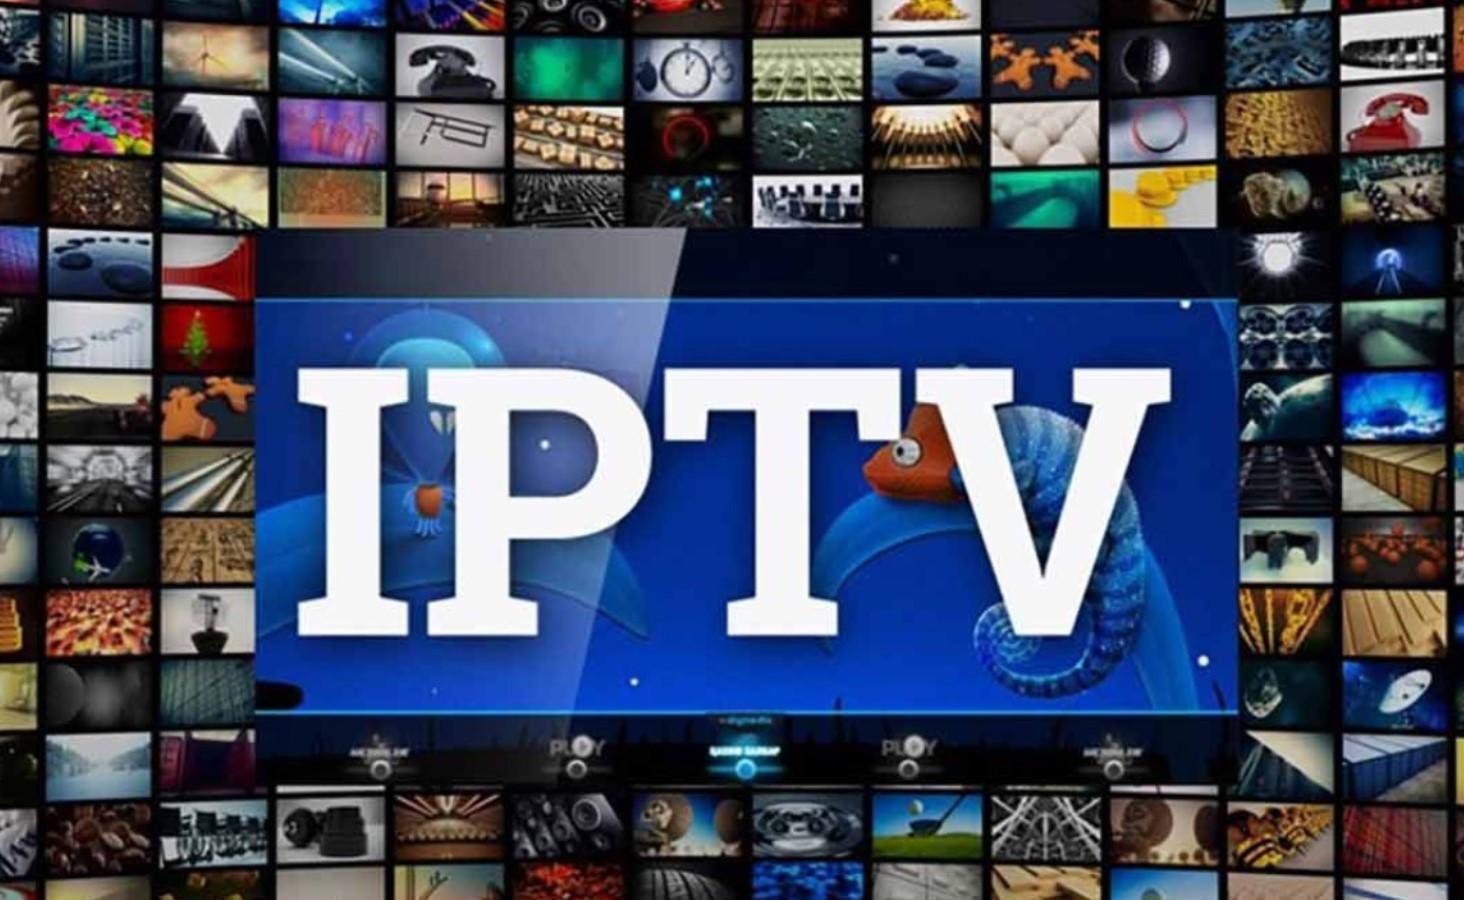 Smart IP TV – Supporting Gadgets and Installation Guide